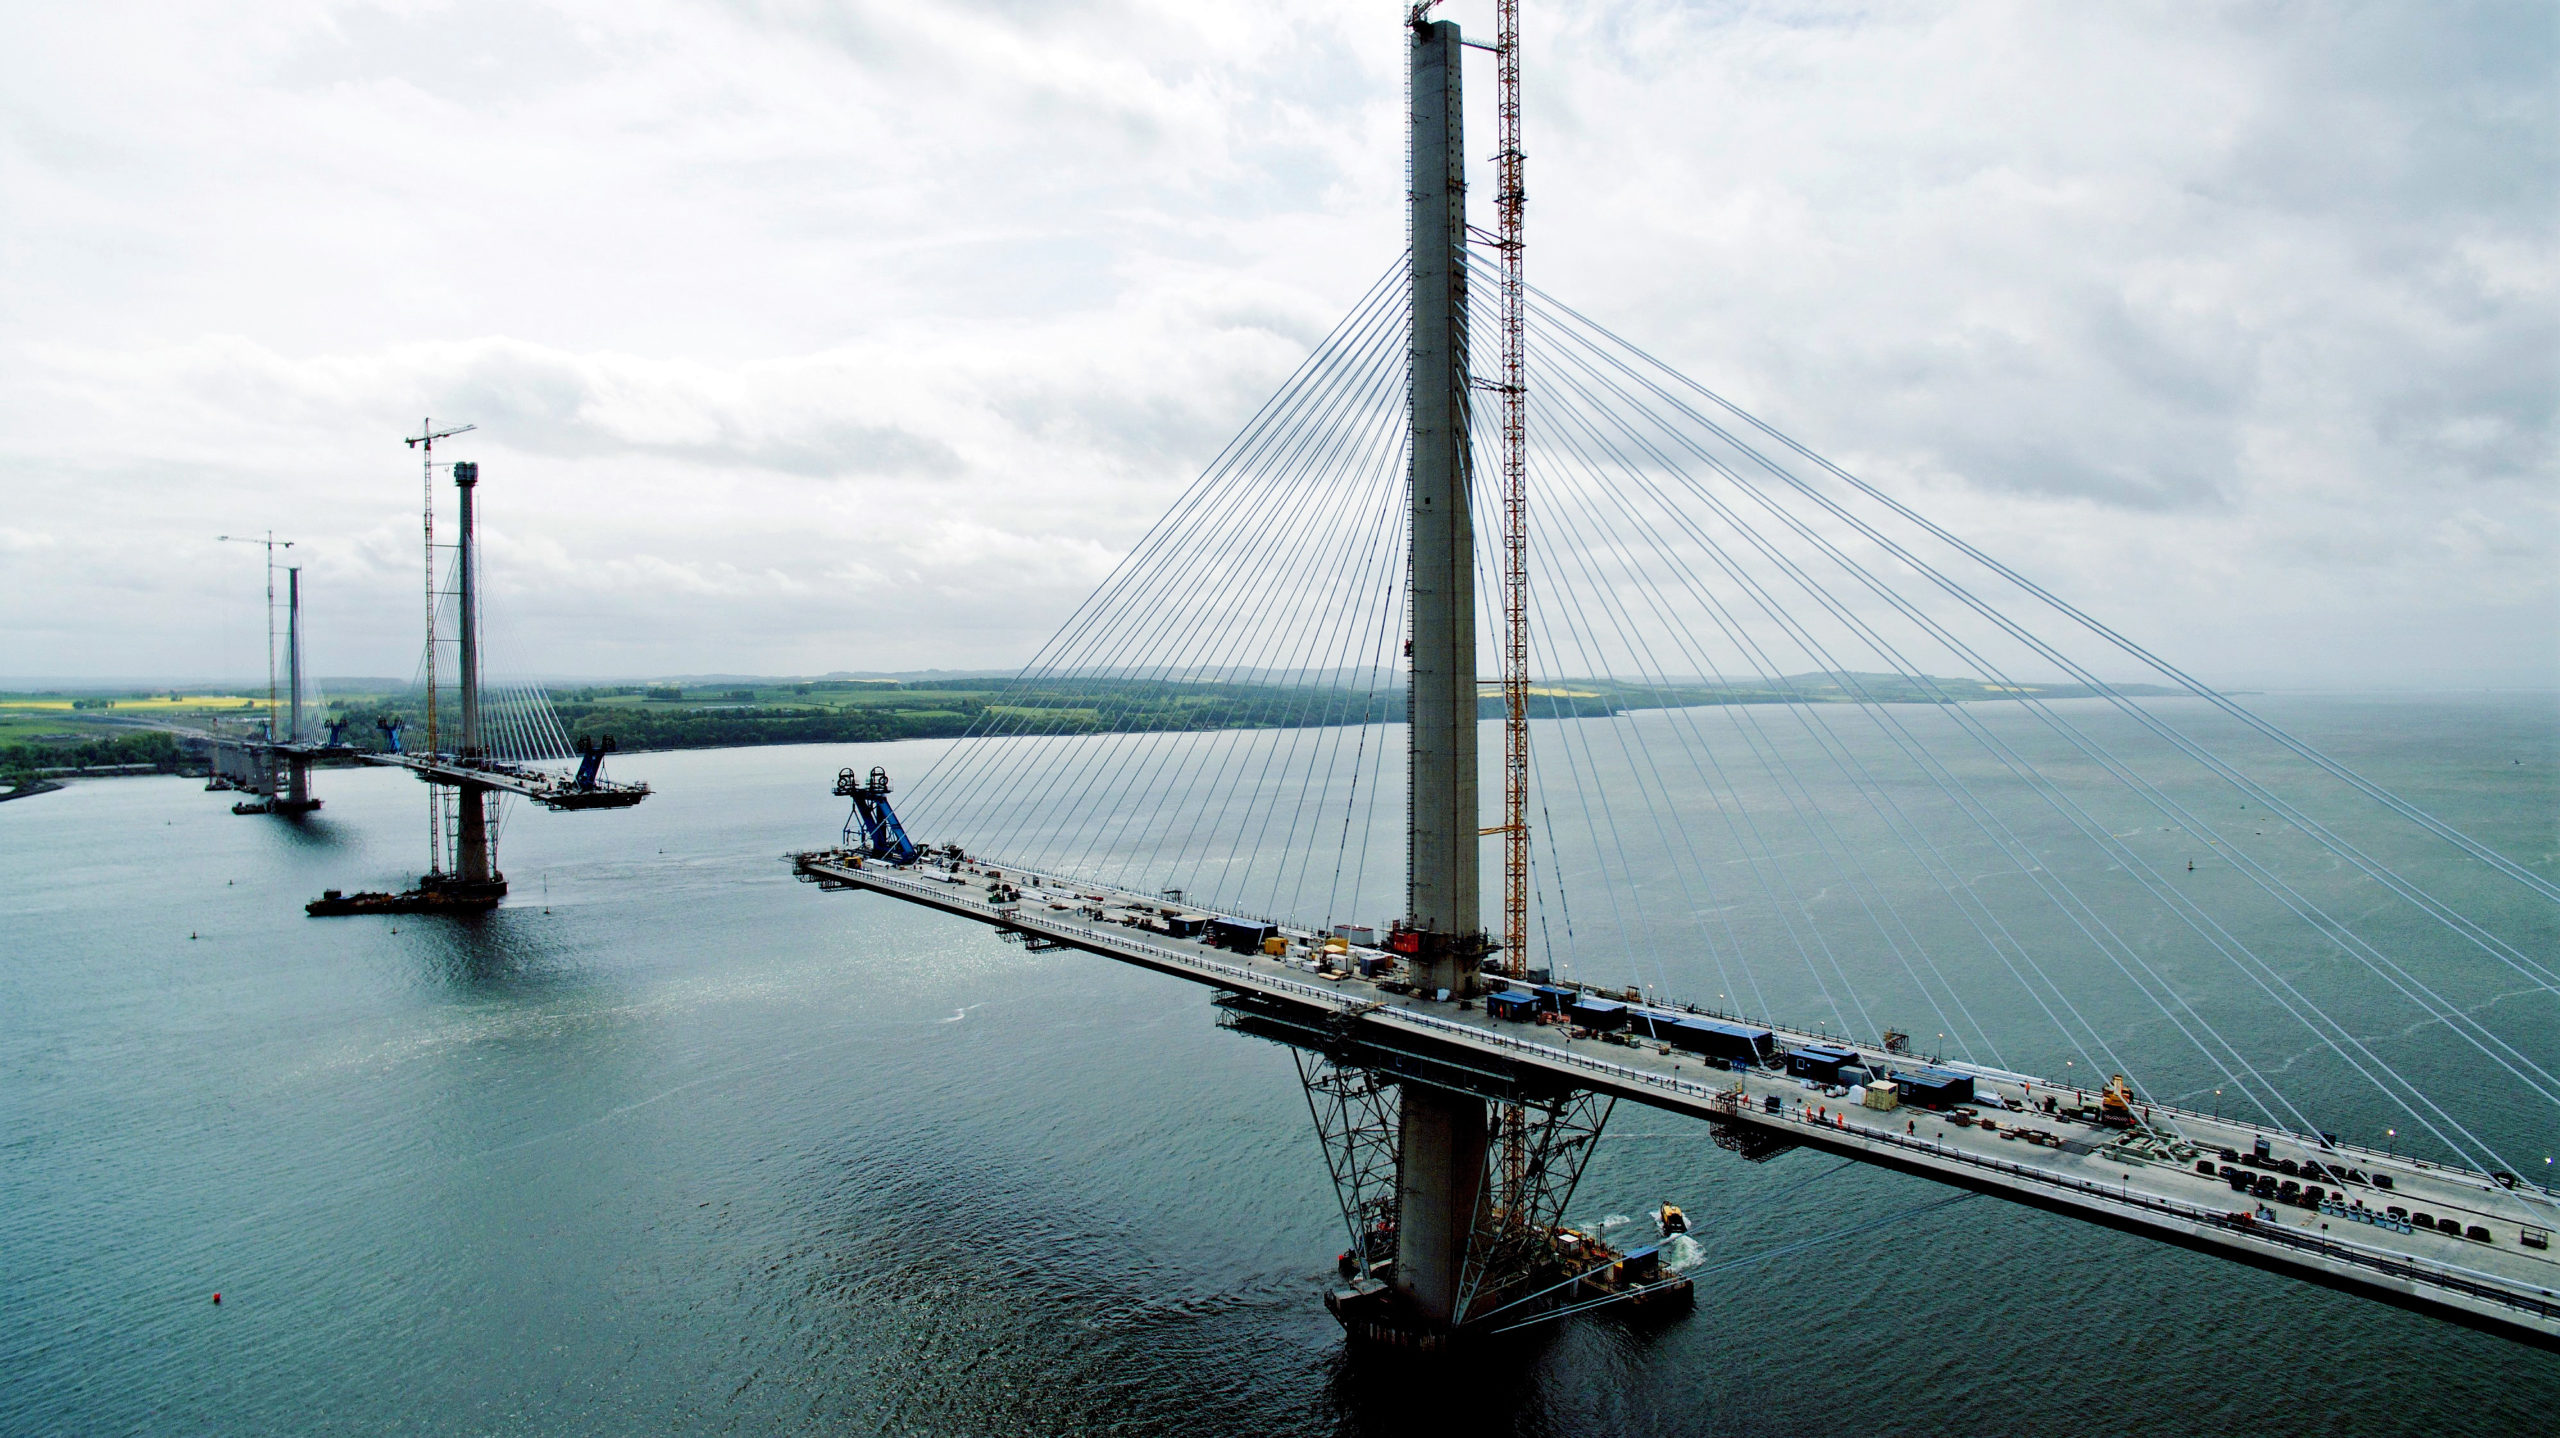 Queensferry Crossing from North case civil and structural engineering project